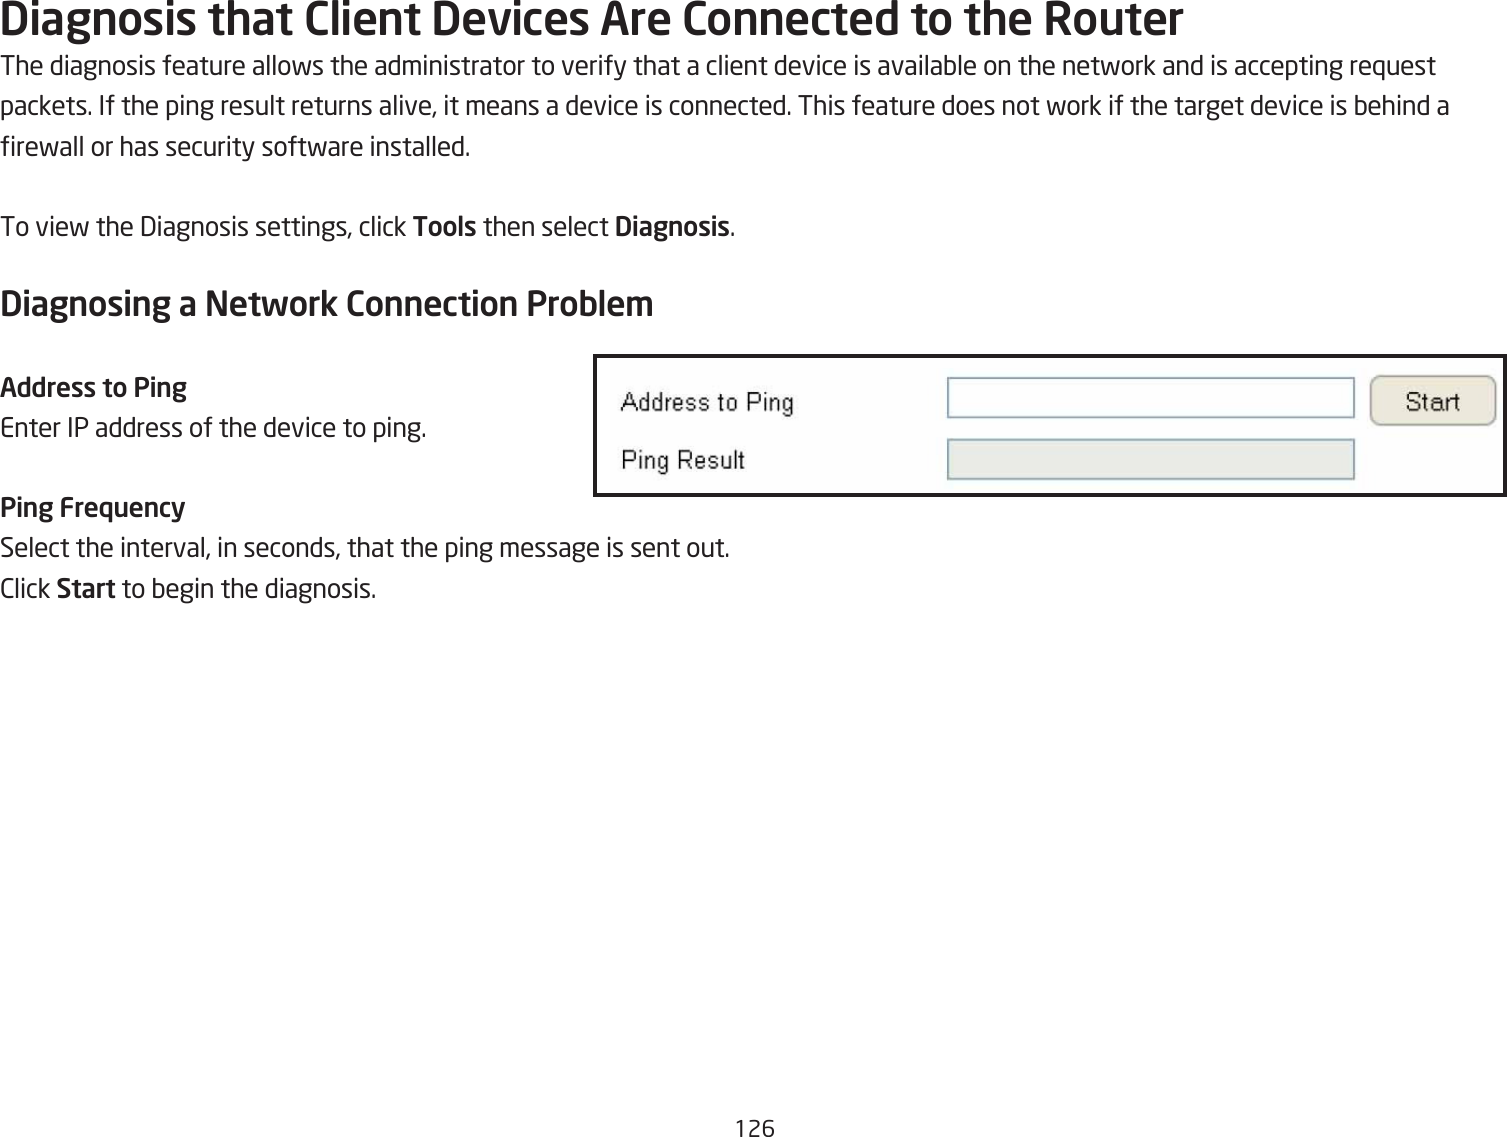 126Diagnosis that Client Devices Are Connected to the RouterThe diagnosis feature allofs the administrator to verify that a client device is availaQle on the netfork and is accepting re`uest packets. If the ping result returns alive, it means a device is connected. This feature does not fork if the target device is Qehind a refall or has security softfare installed.To vief the 3iagnosis settings, click Tools then select Diagnosis.Diagnosing a Network Connection Proble\Address to PingEnter IP address of the device to ping.Ping FrequencySelect the interval, in seconds, that the ping message is sent out.2lick Start to Qegin the diagnosis.